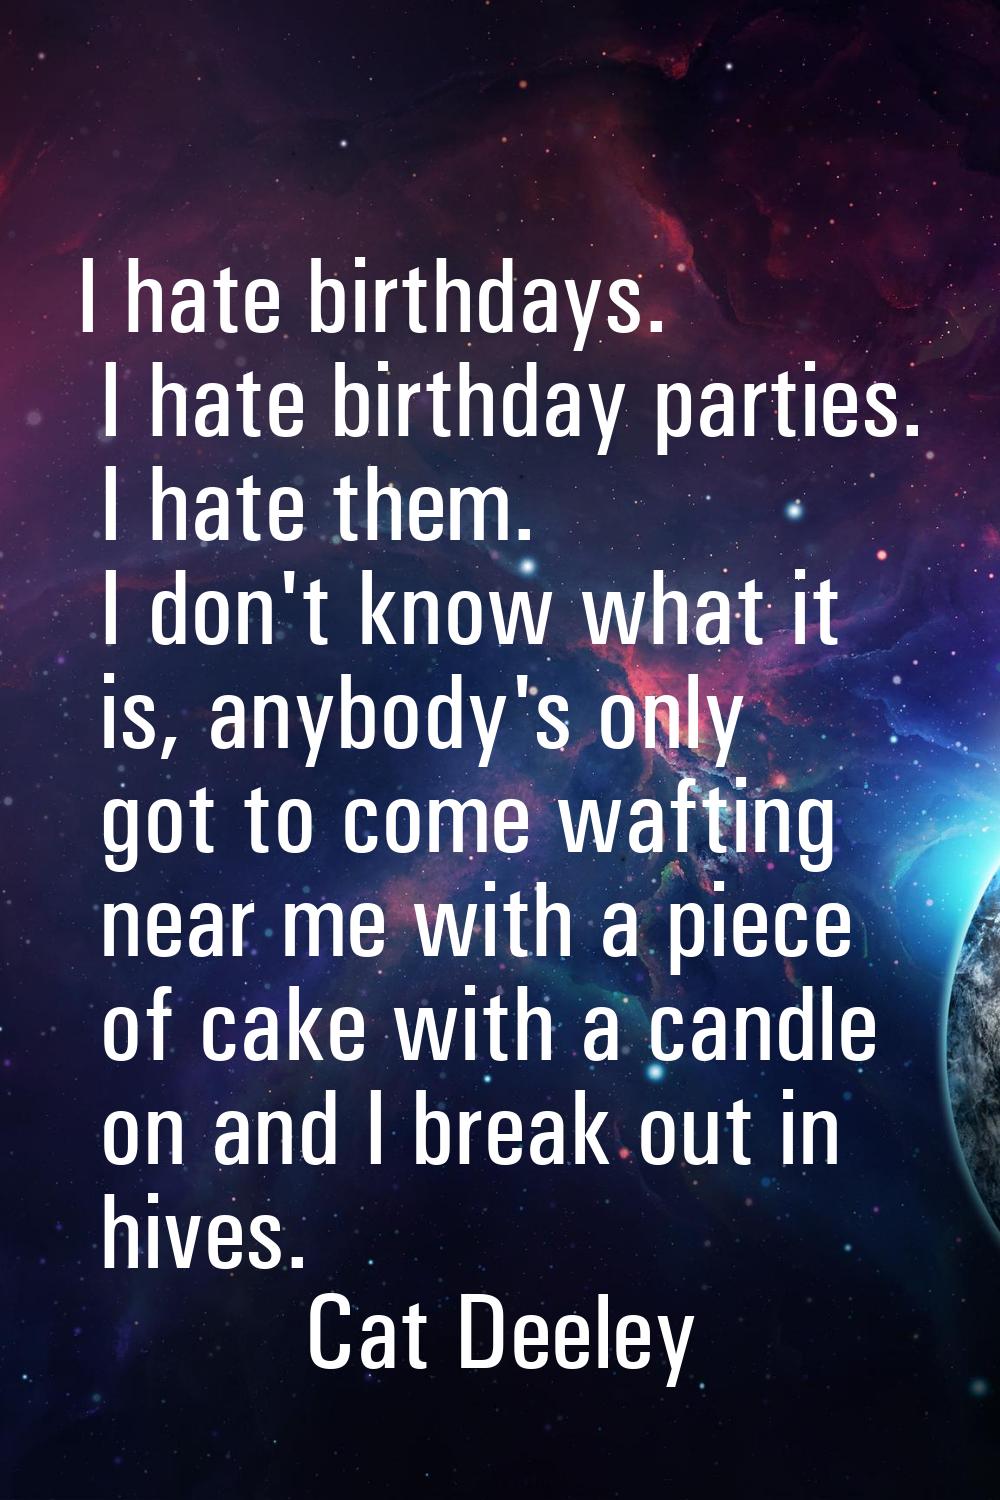 I hate birthdays. I hate birthday parties. I hate them. I don't know what it is, anybody's only got